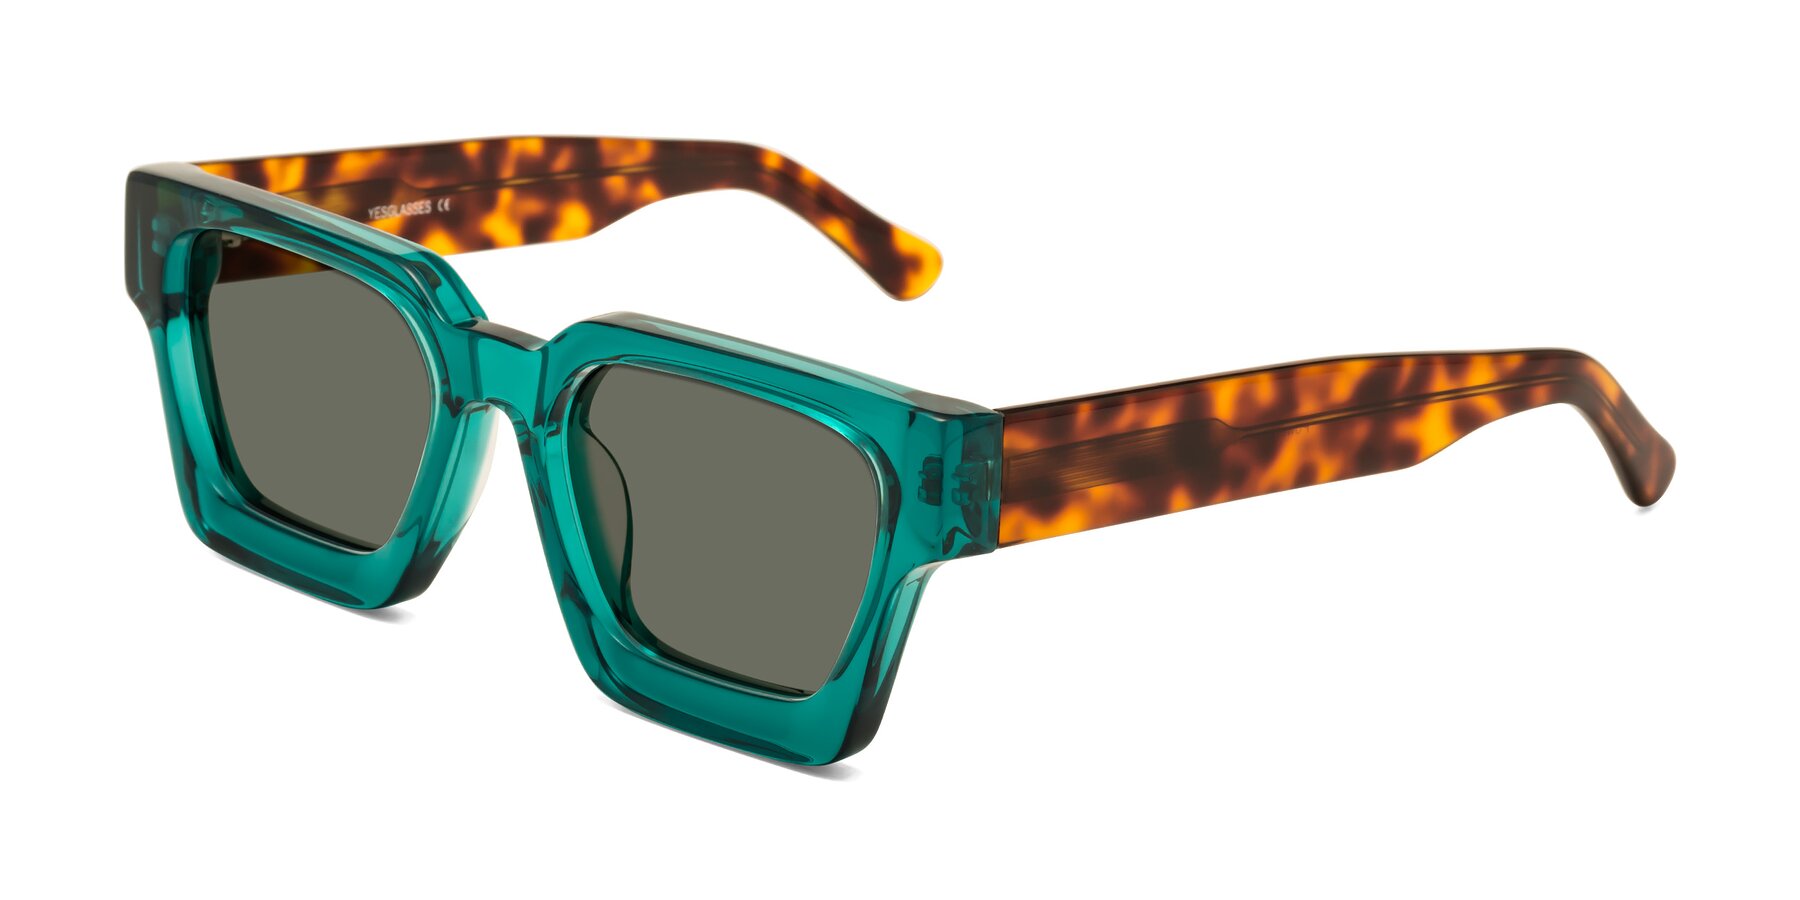 Angle of Powers in Green-Tortoise with Gray Polarized Lenses